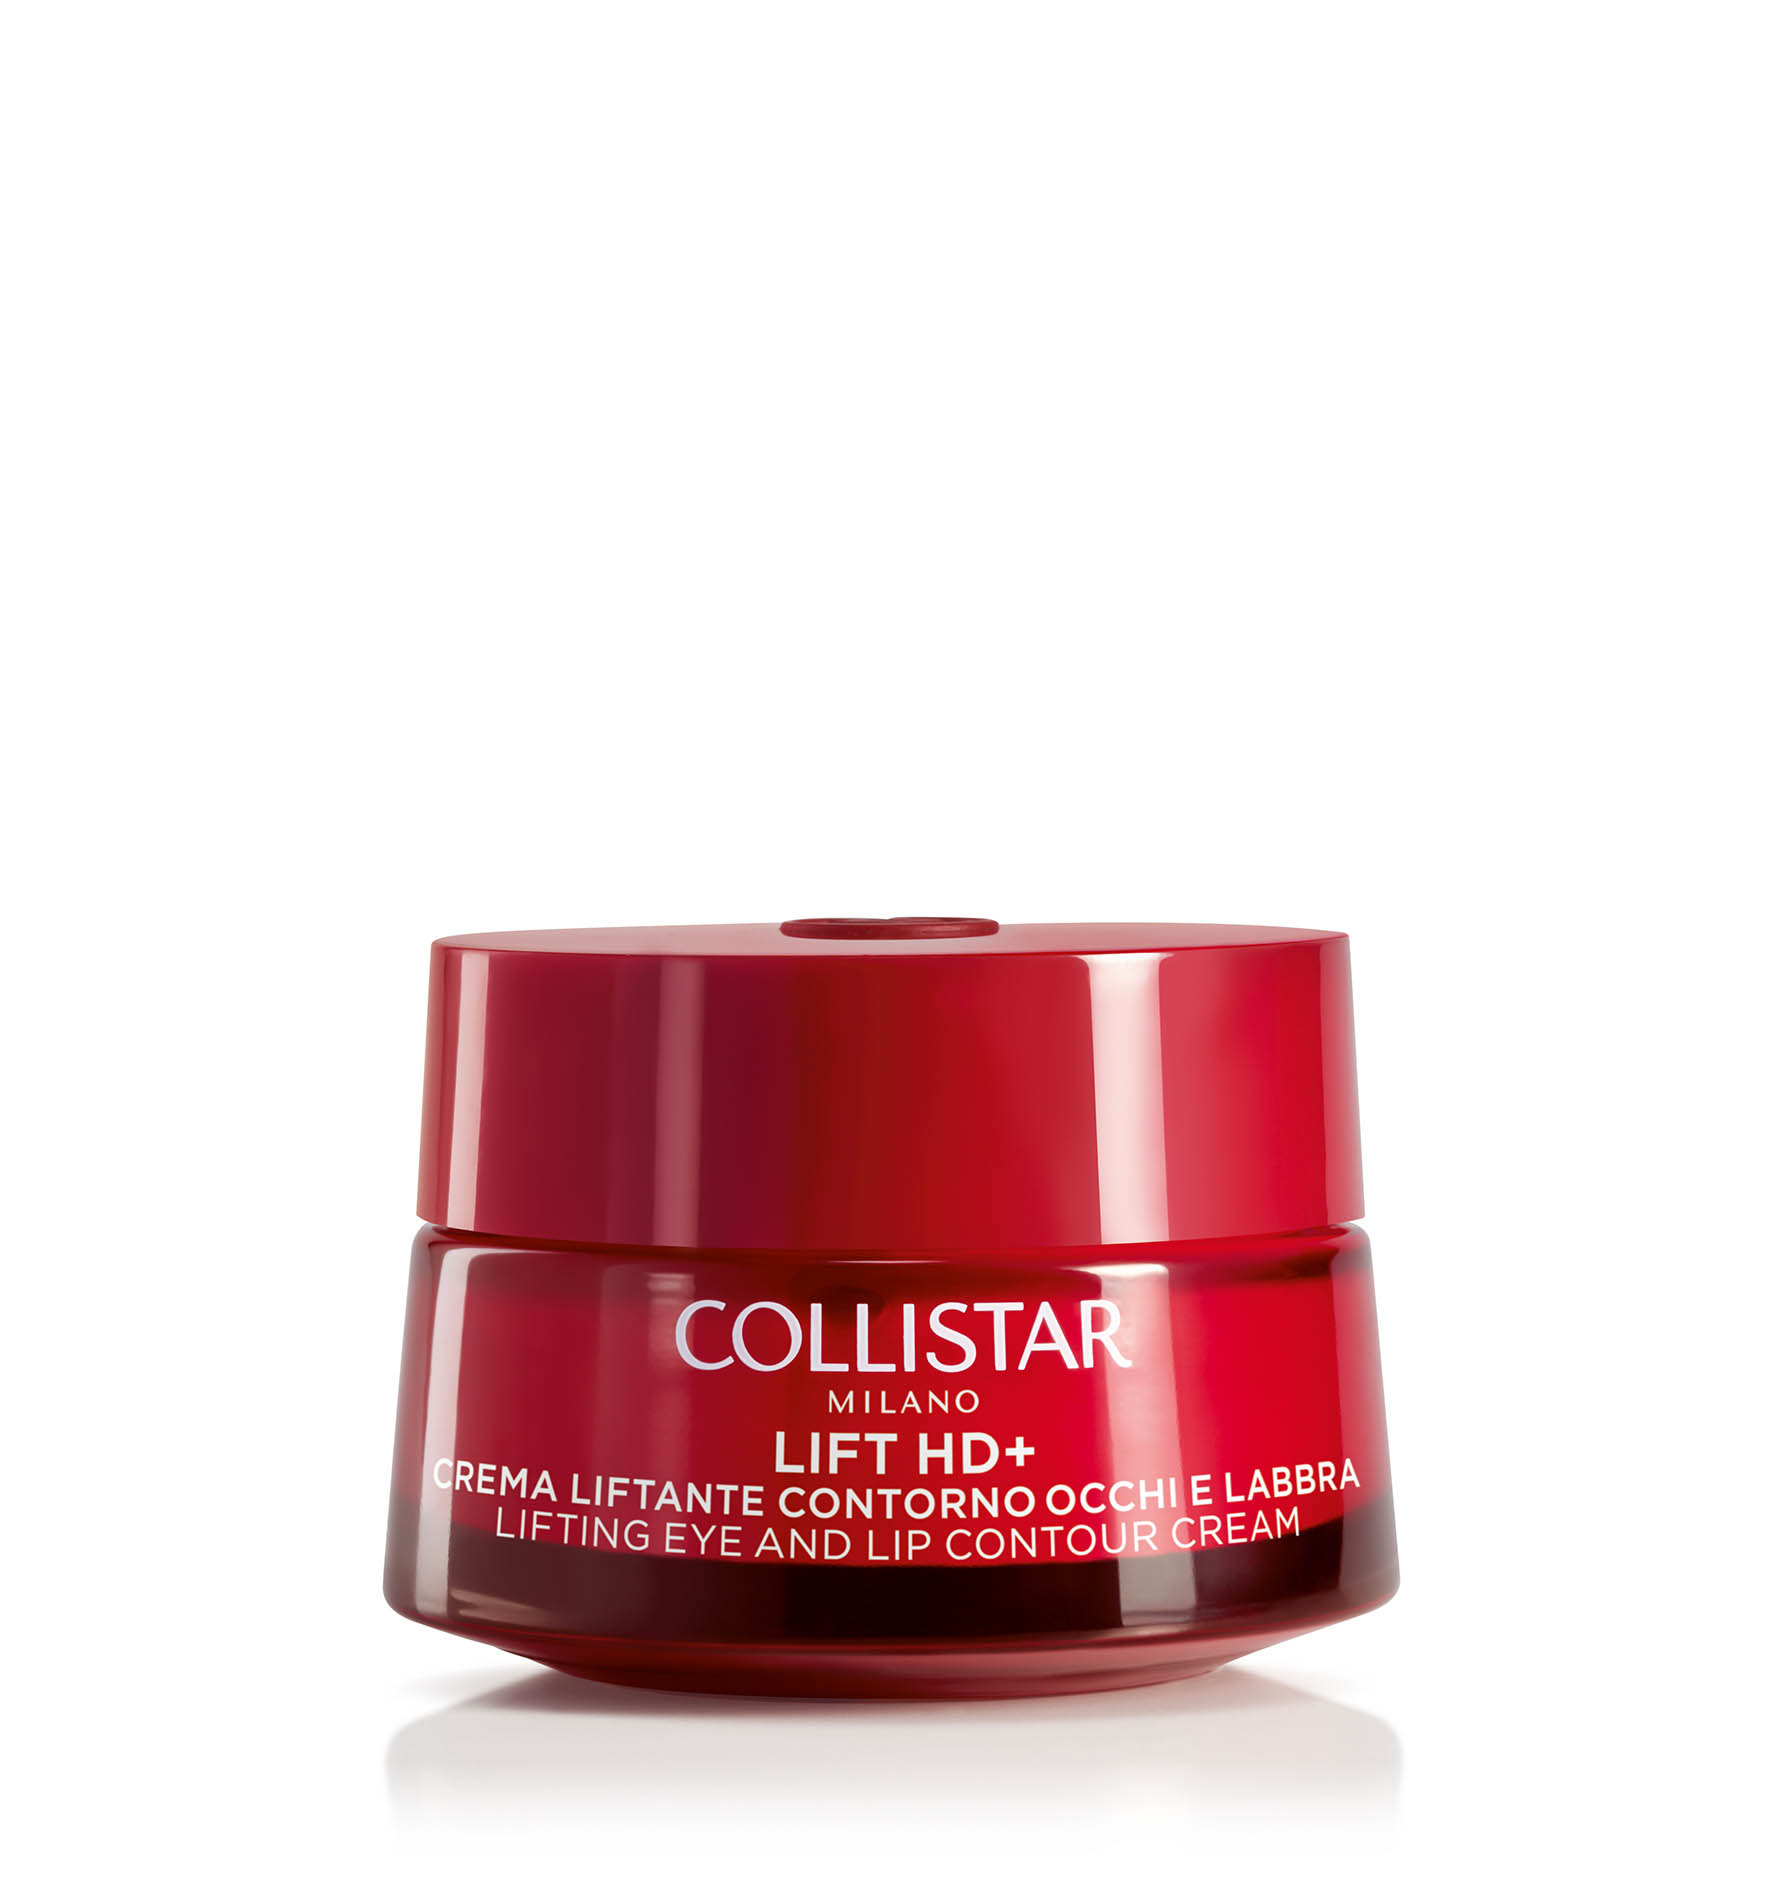 LIFT HD+ LIFTING EYE AND LIP CONTOUR CREAM - Dry skin | Collistar - Shop Online Ufficiale